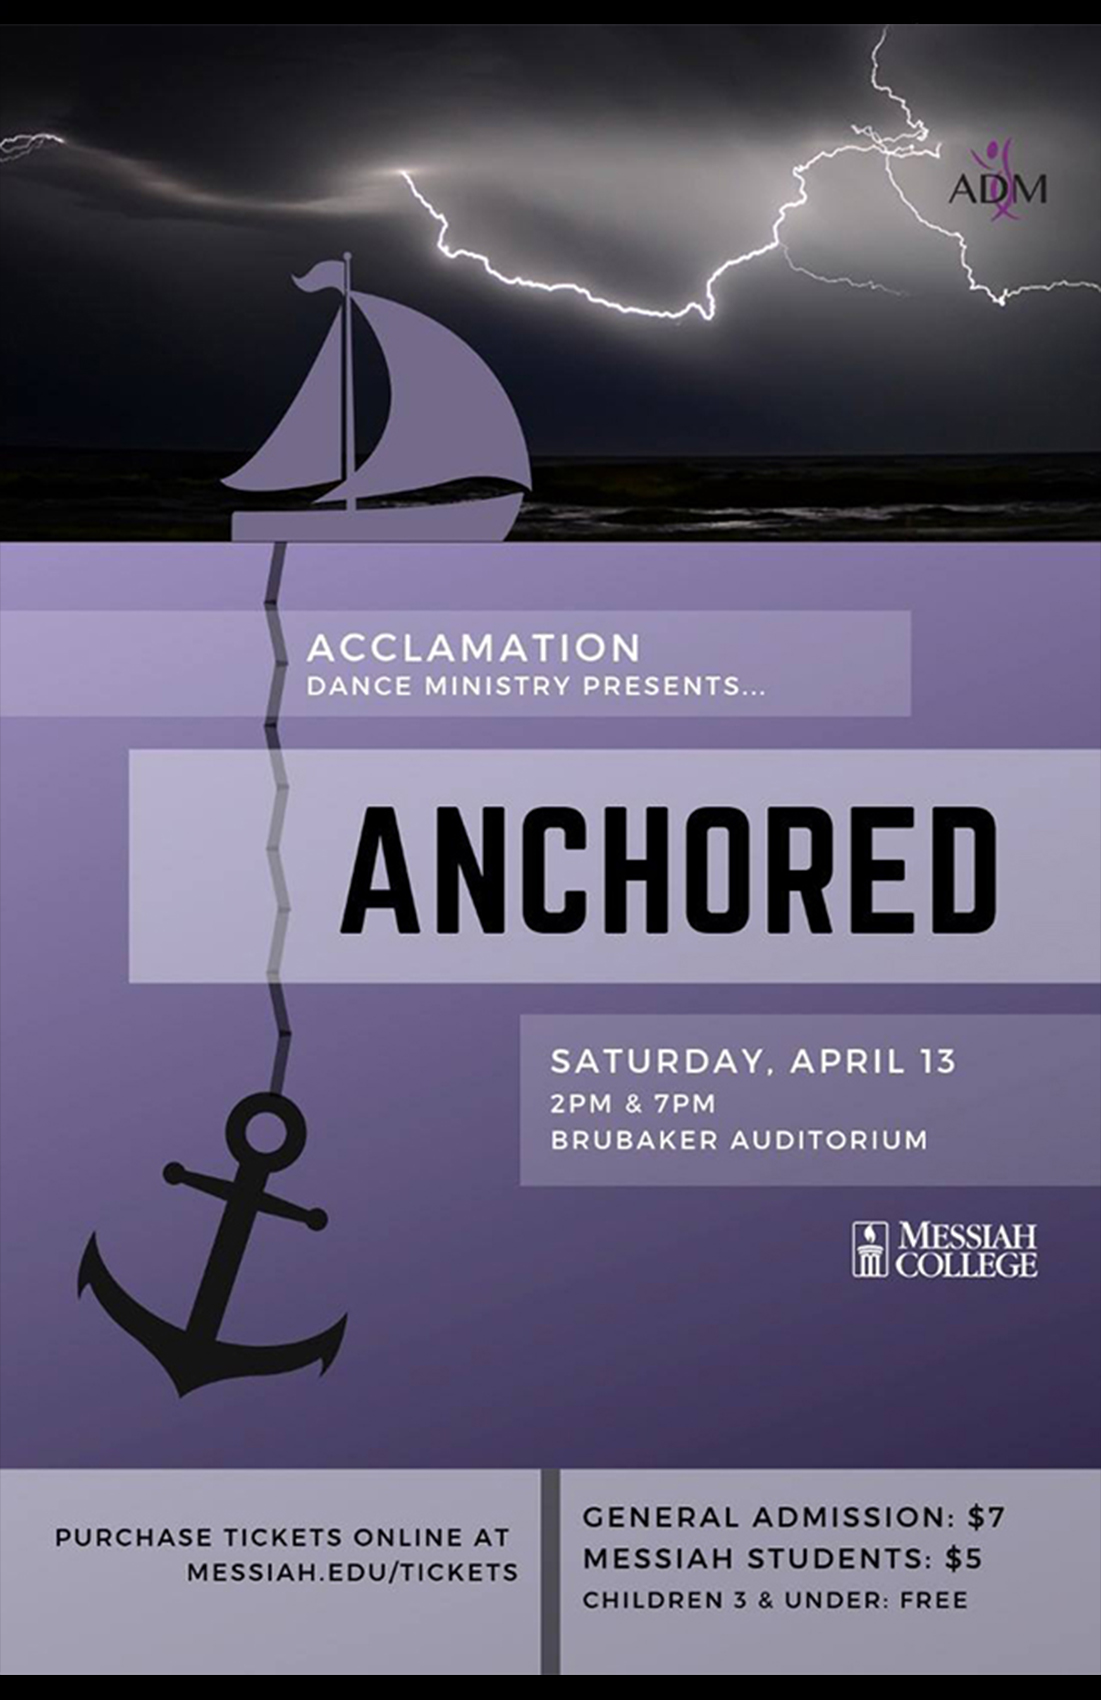 Acclamation Spring 2019:  Anchored